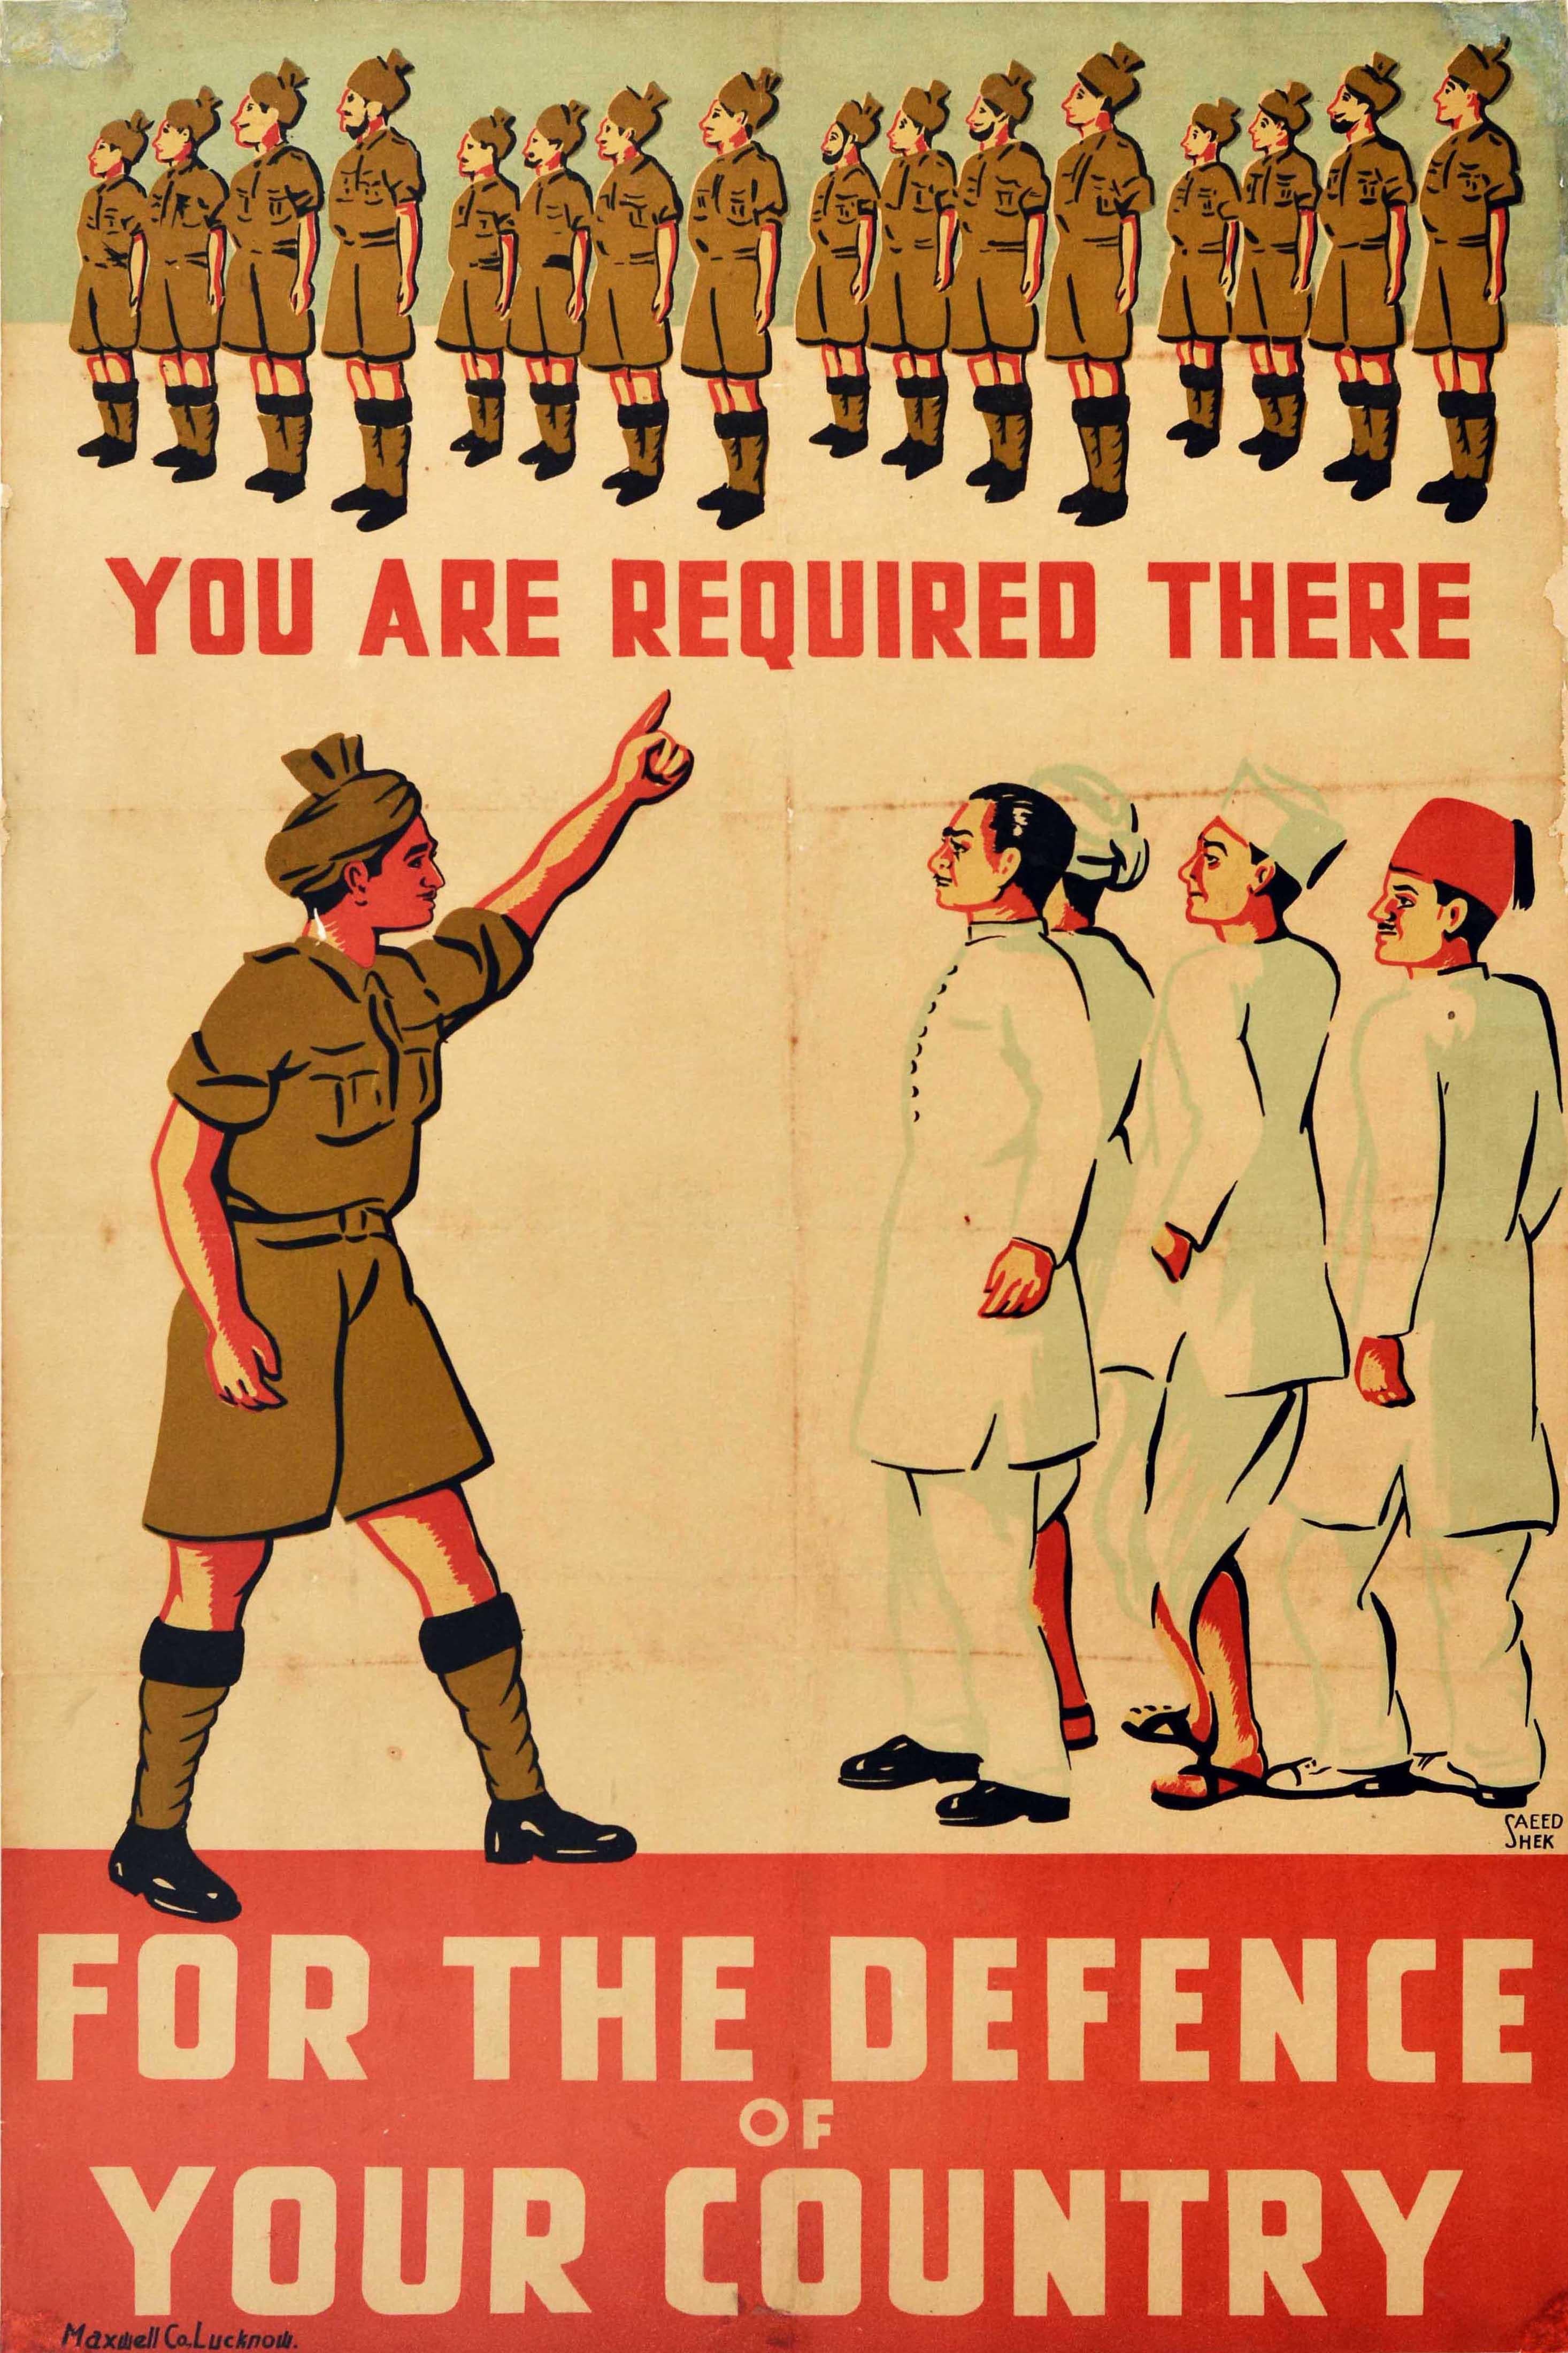 Rare original vintage Indian army recruitment propaganda poster featuring a military leader pointing to a group of men dressed in white civilian clothes towards lines of soldiers who are standing to attention in army uniform with the red and white